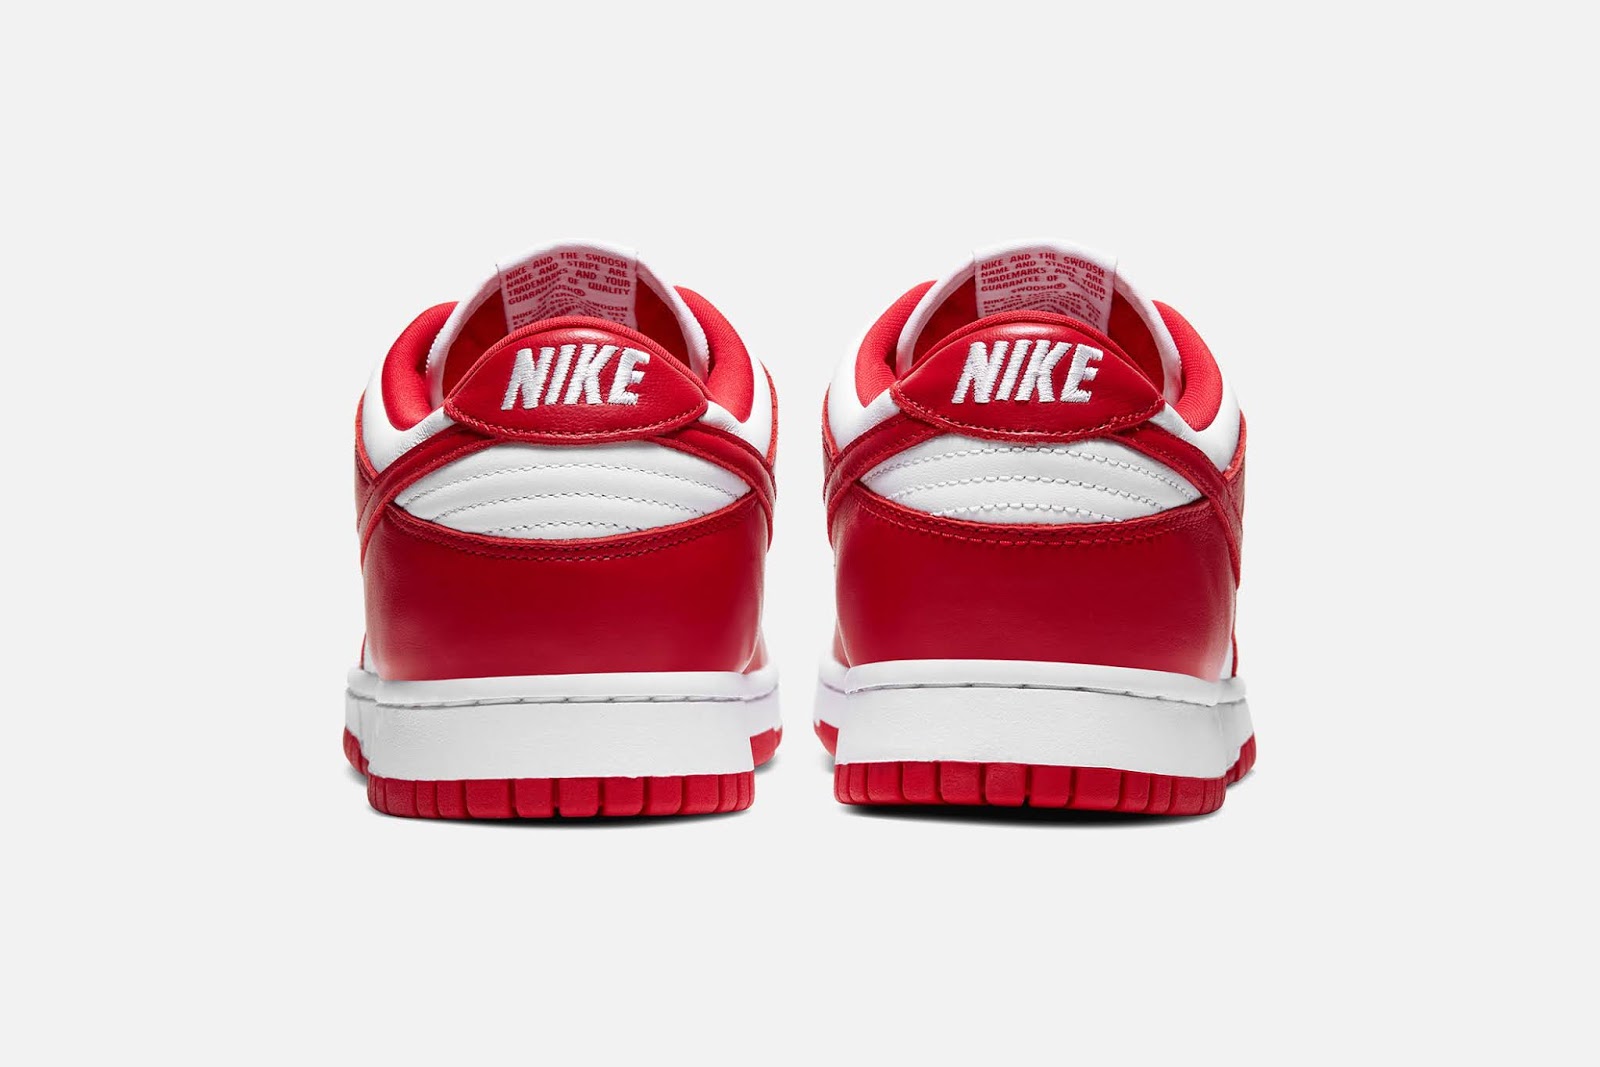 Swag Craze: First Look: Nike Dunk Low - 'University Red'